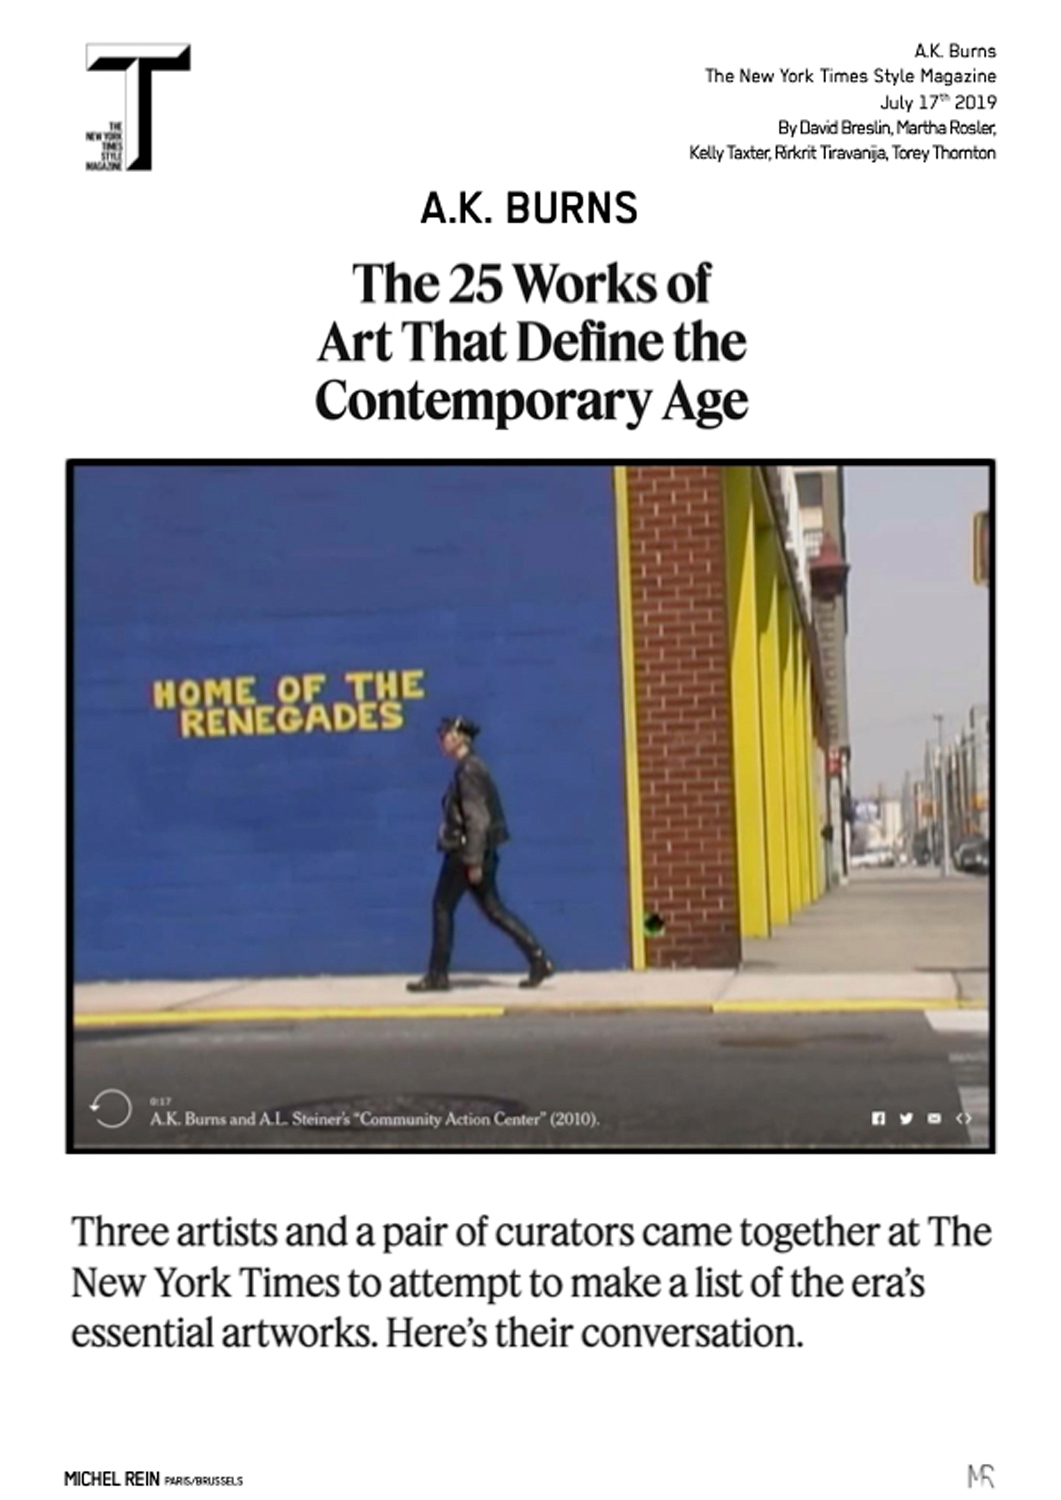 The 25 Works of Art That Define the Contemporary Age - The New York Times Style Magazine